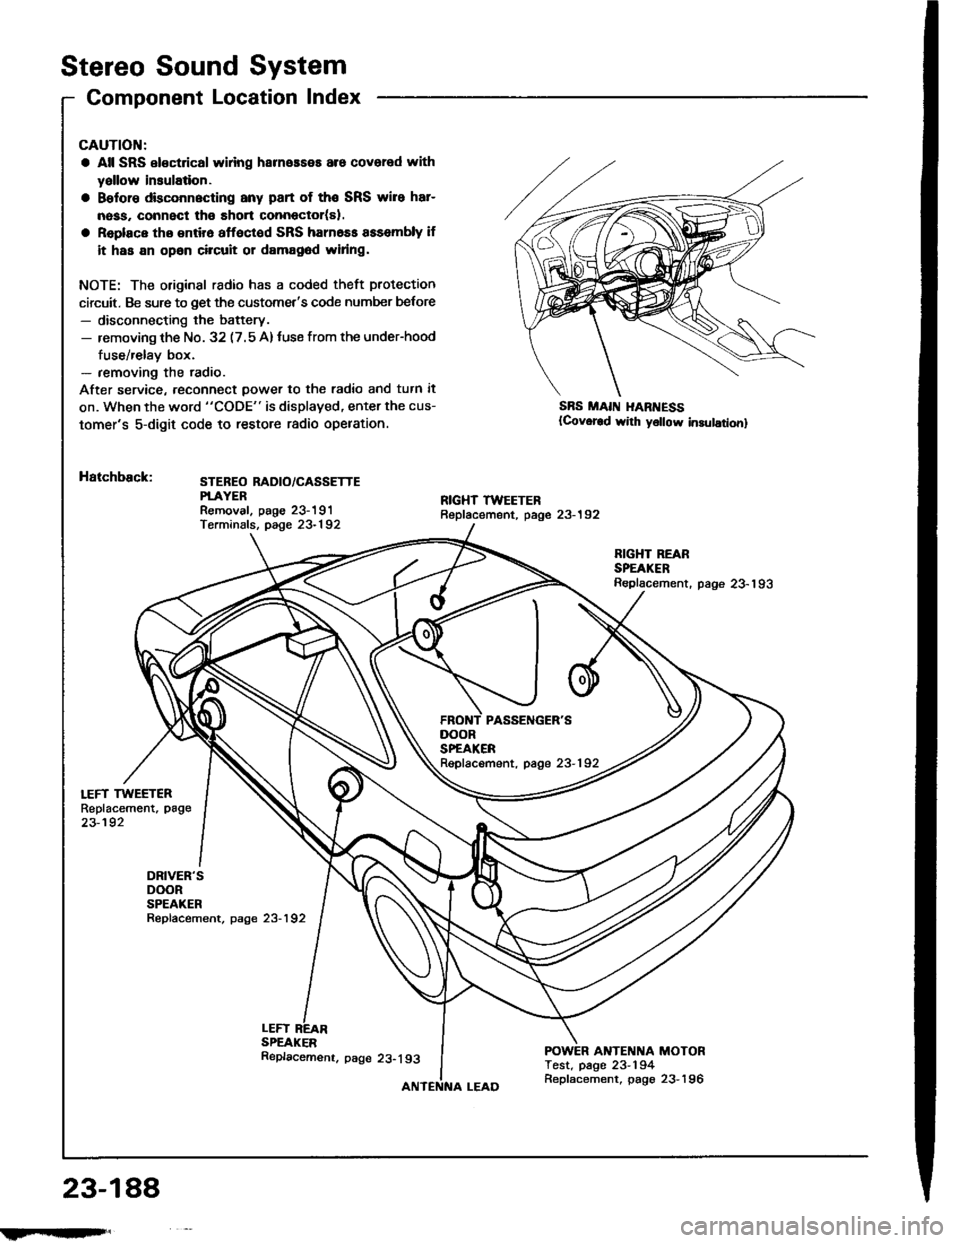 HONDA INTEGRA 1994 4.G Workshop Manual Stereo Sound System
Component Location Index
LEFT TWEETERReplacement, page
23-192
DRIVERSDOORSPEAKERRepfacement, page 23-192
CAUTION:
a All SRS el€ctrical wlring harneaseE are covered with
yallow i